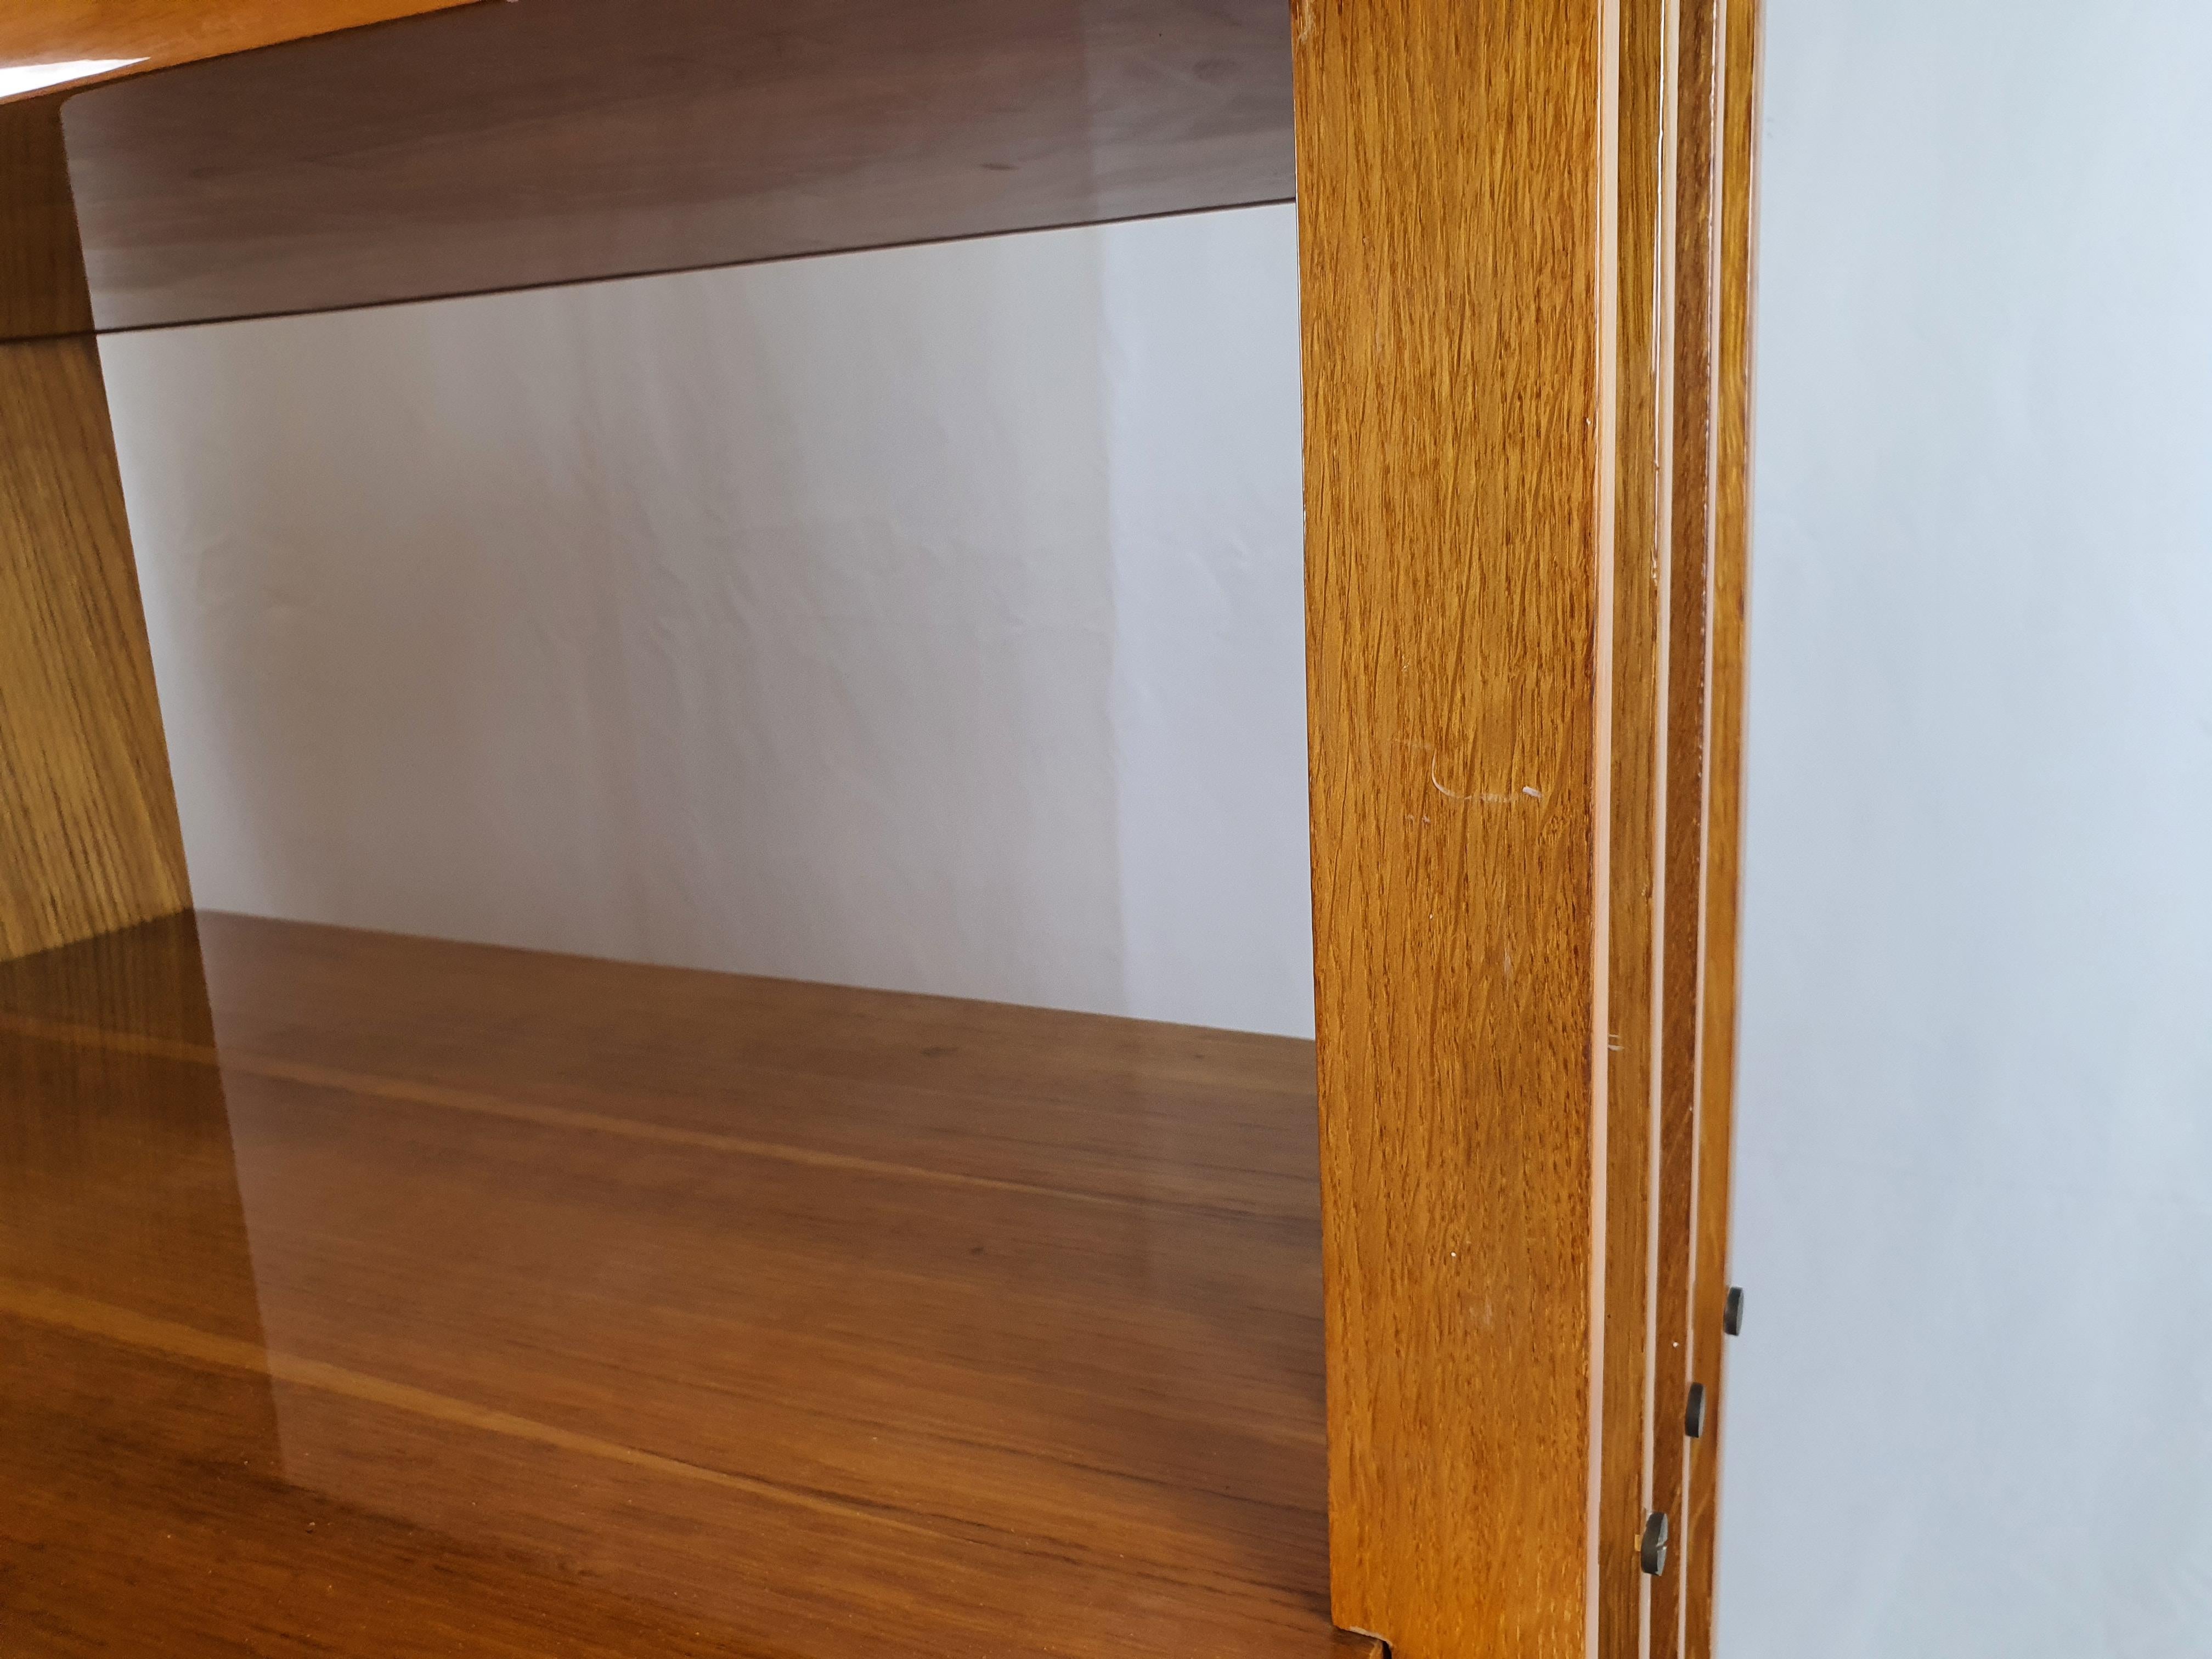 Milanese Bookcase Sideboard in Beech, 1950s For Sale 10